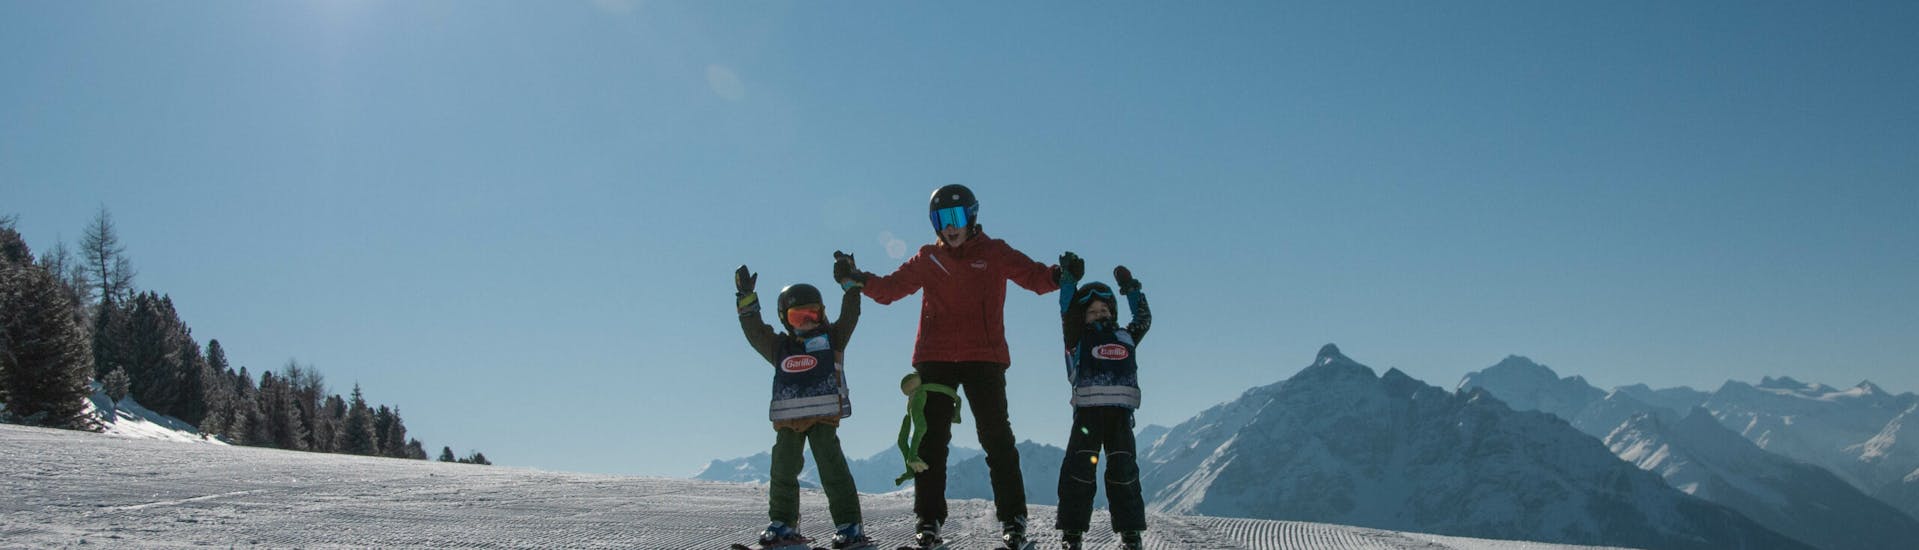 Private Ski Lessons for Families for Advanced Skiers from Ski- & Snowboardschule Innsbruck.